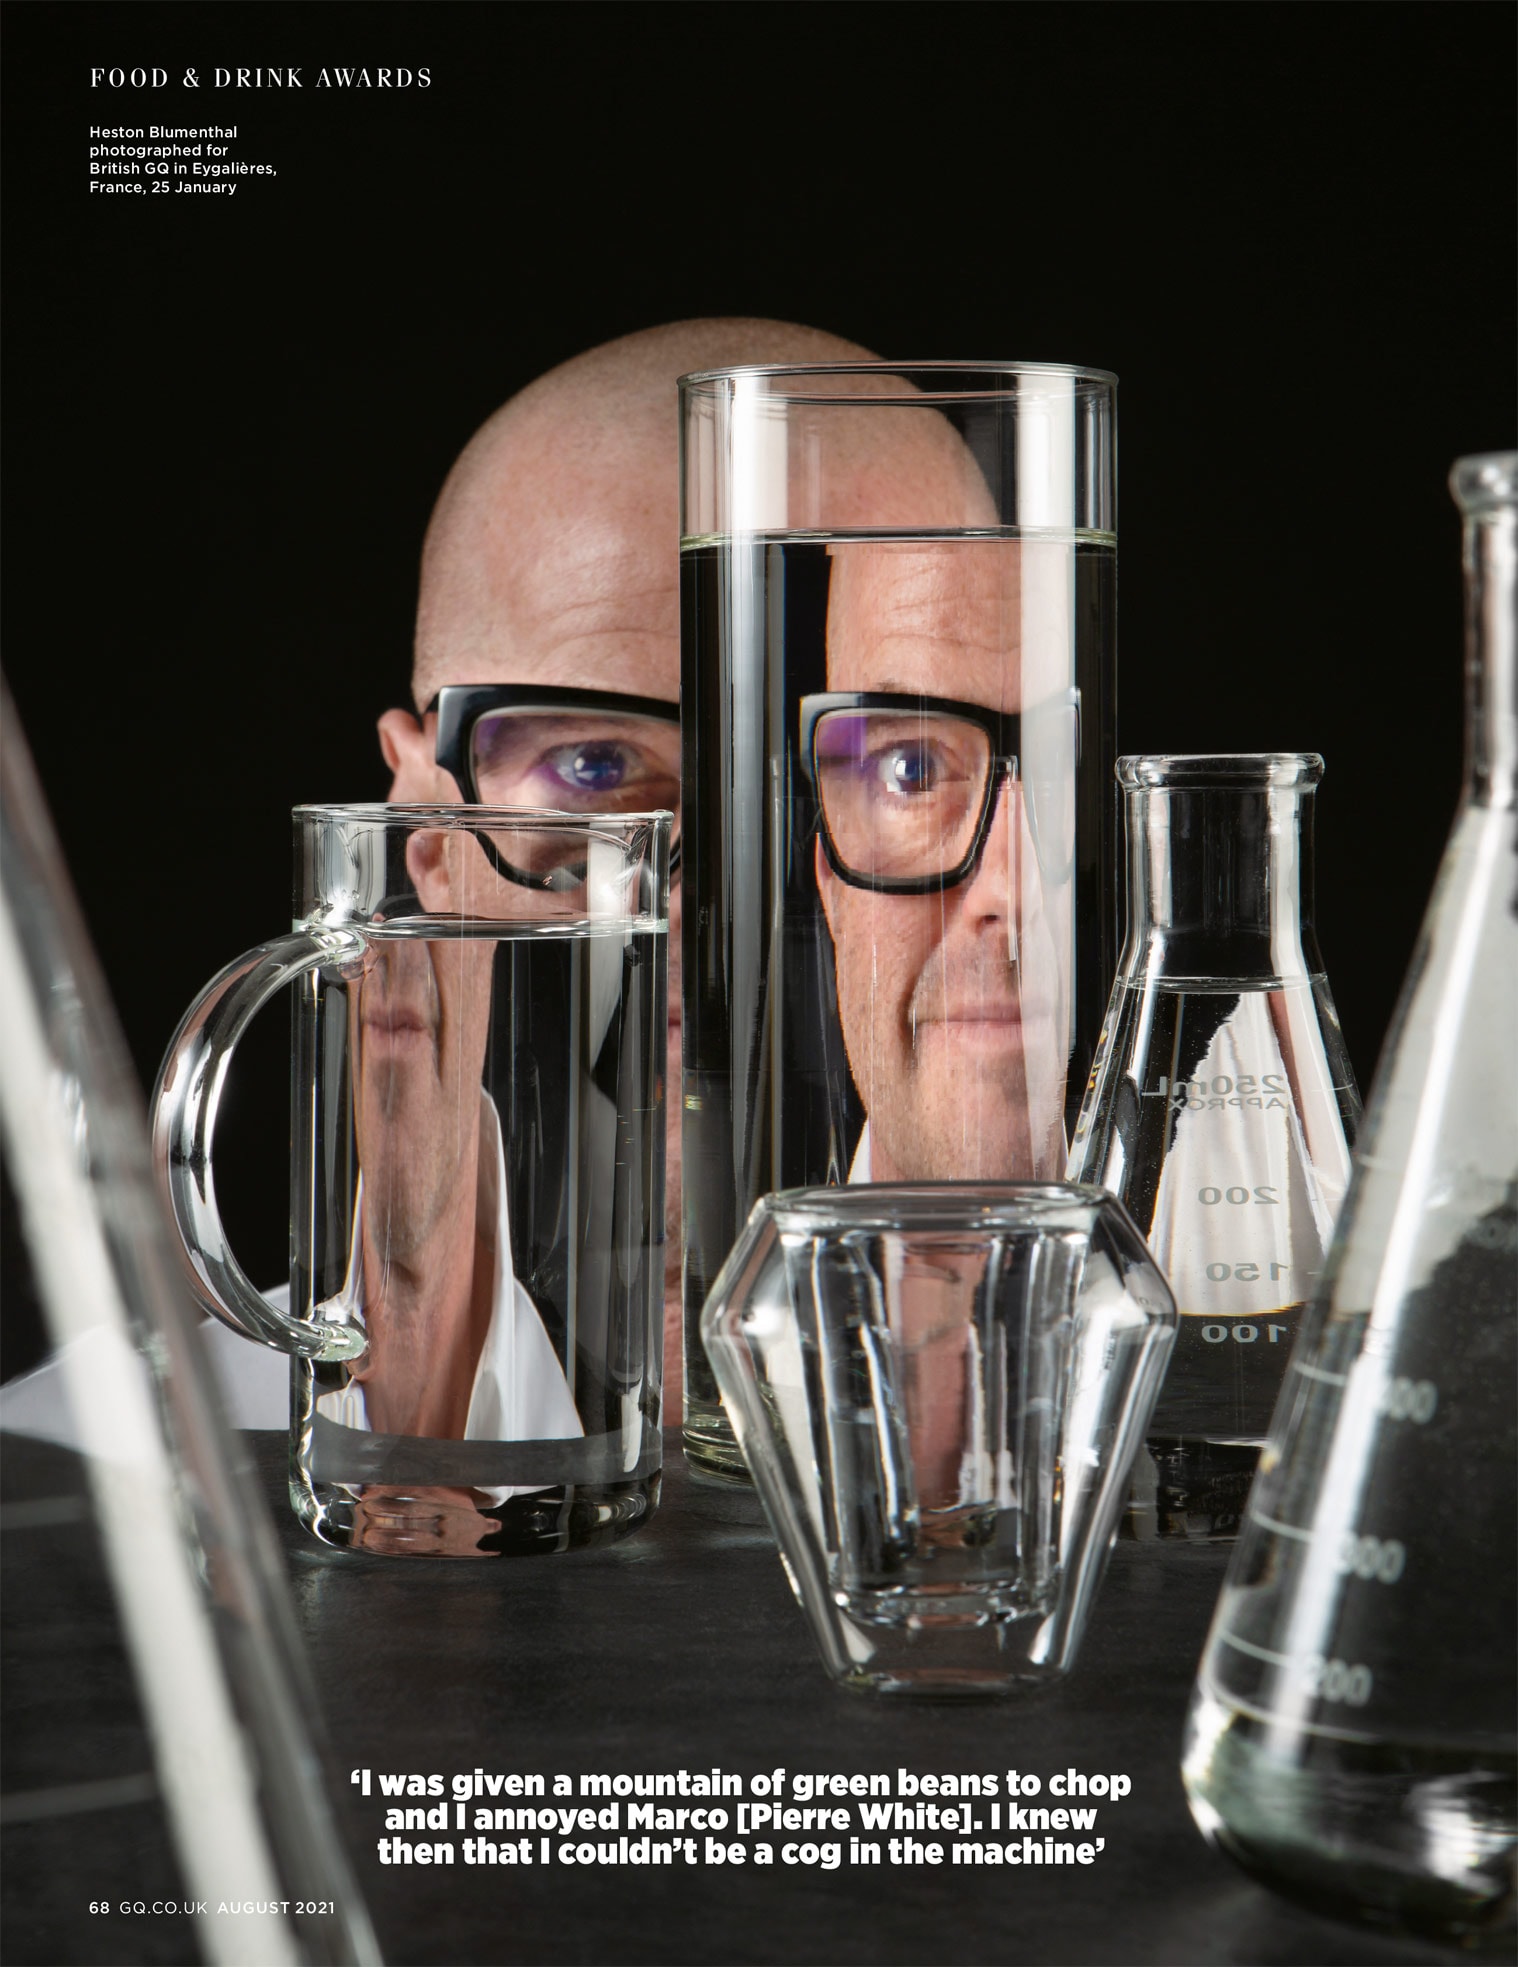 Page from magazine showing a studio photograph of Heston Blumenthal against a black background looking through glass containers